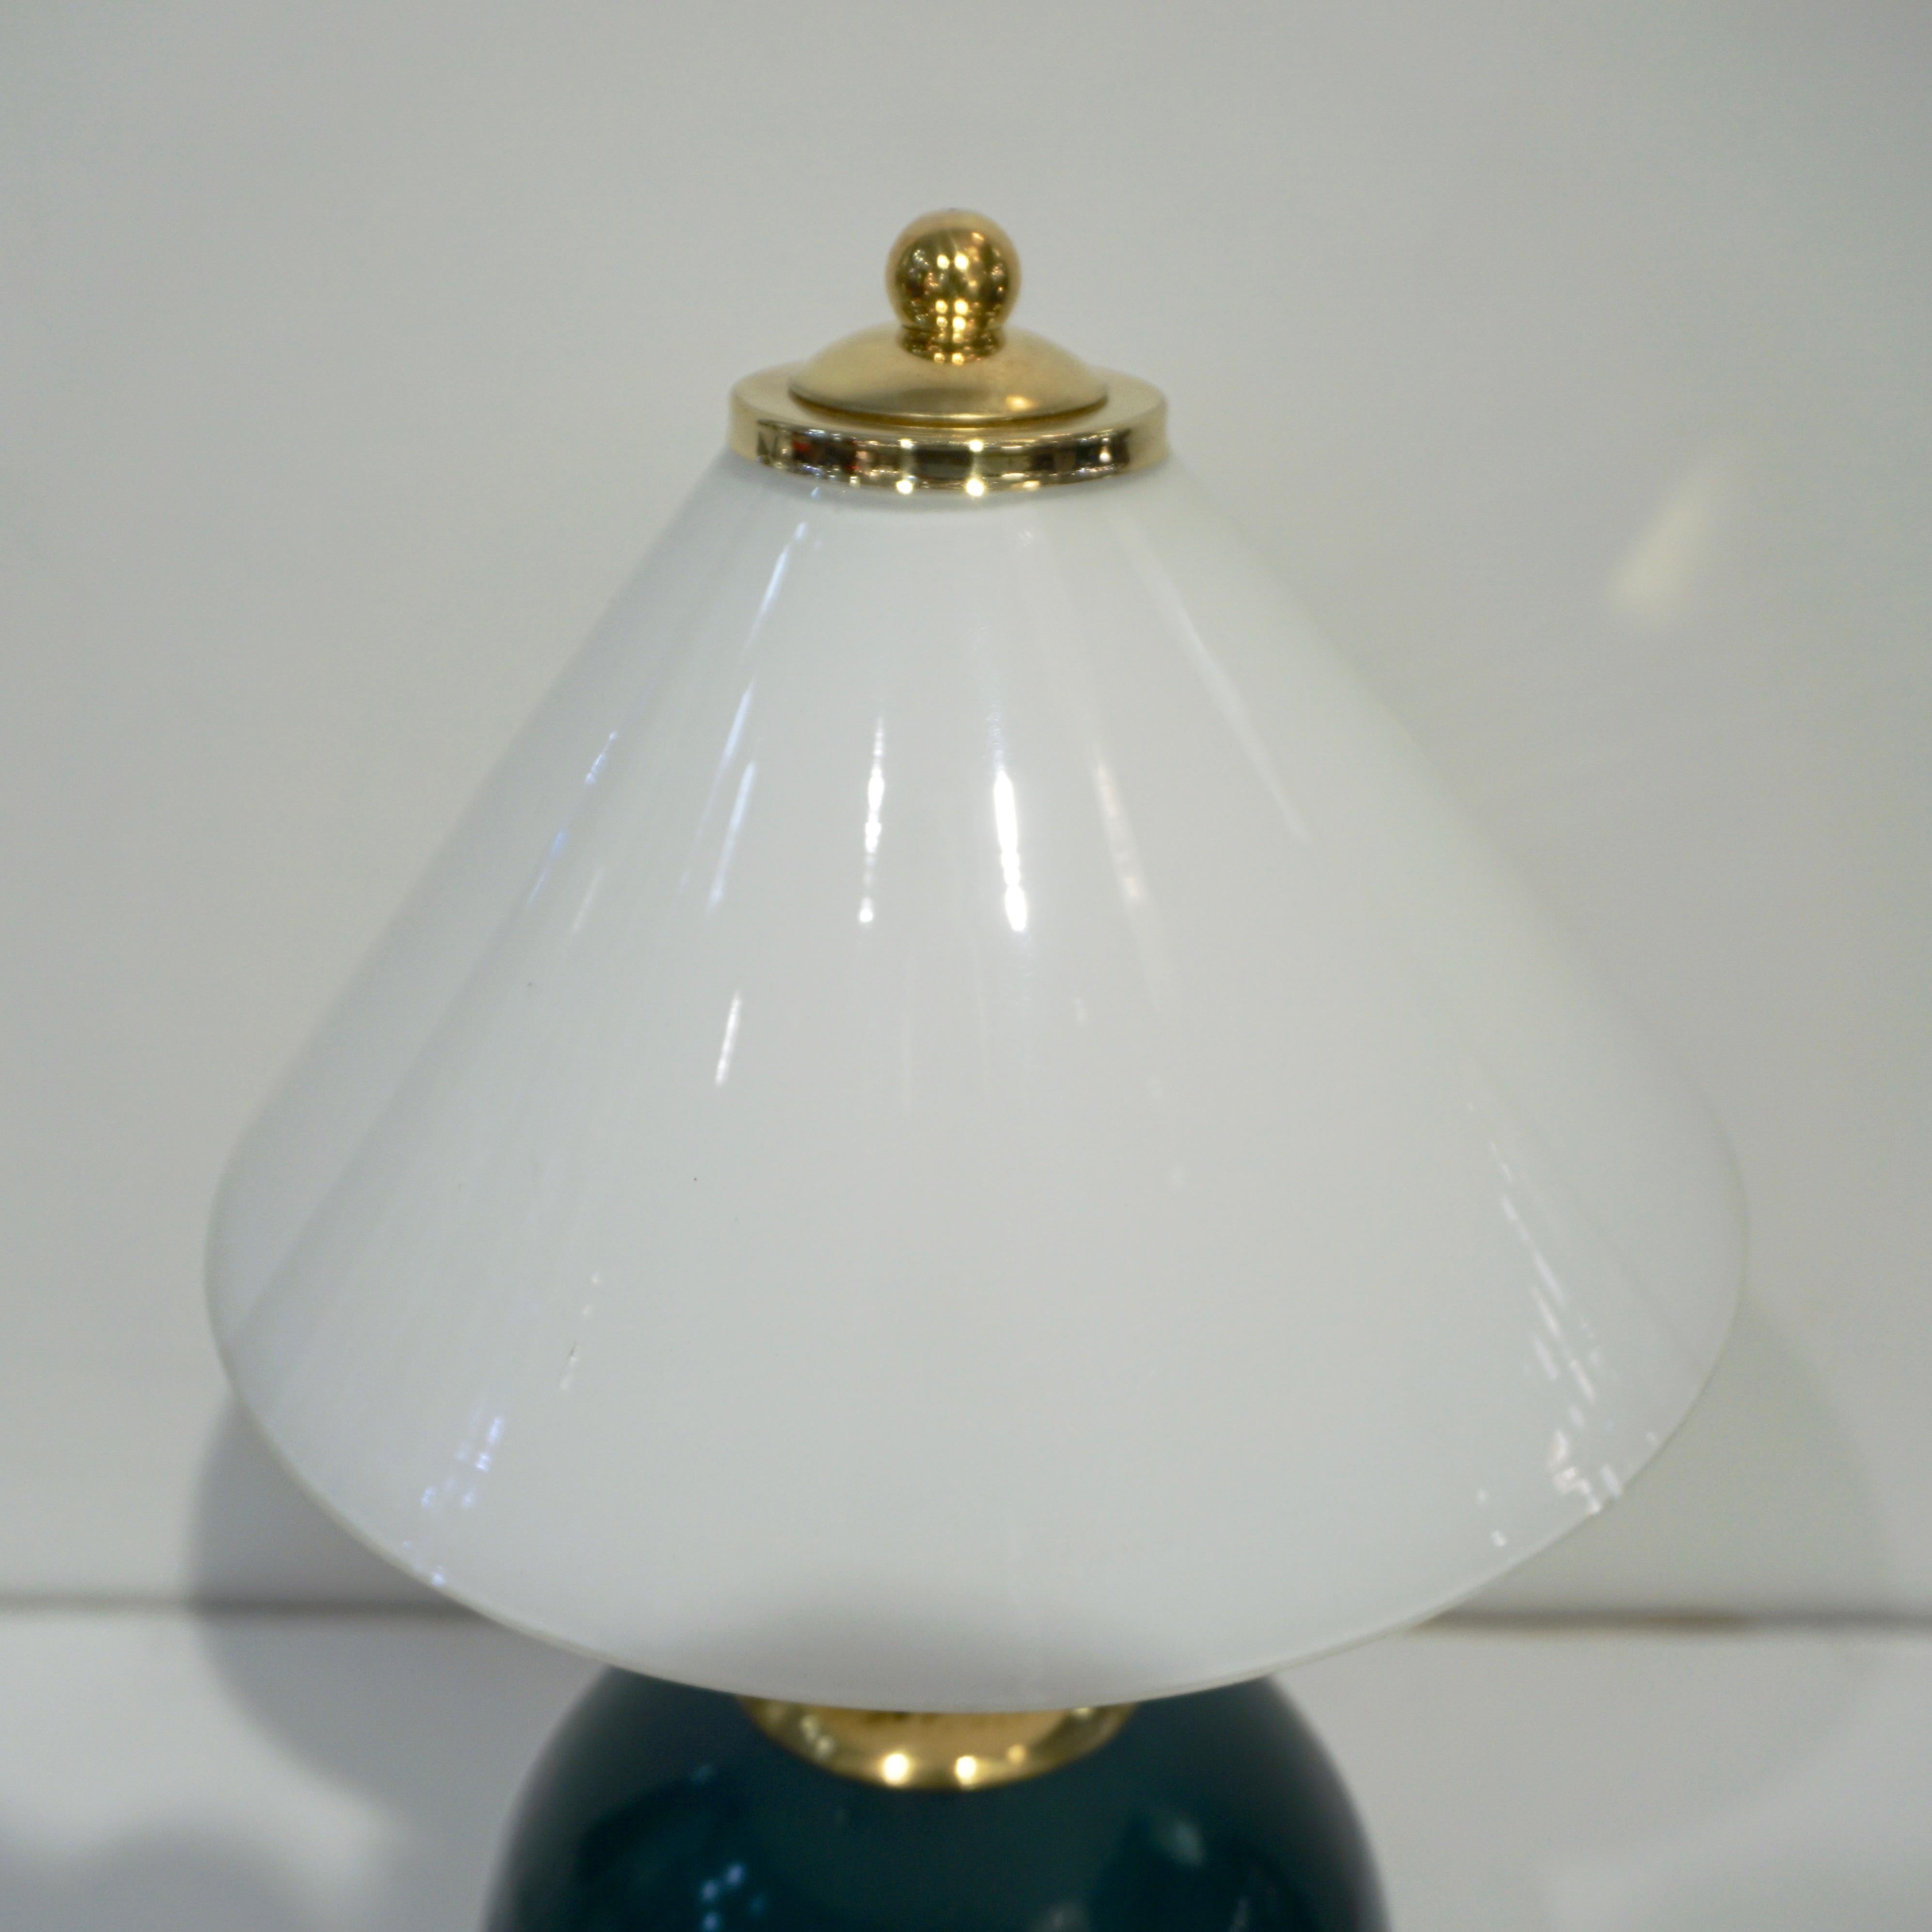 Hand-Crafted 1980s Italian Vintage White & Jade Green Murano Glass Brass Desk / Table Lamps